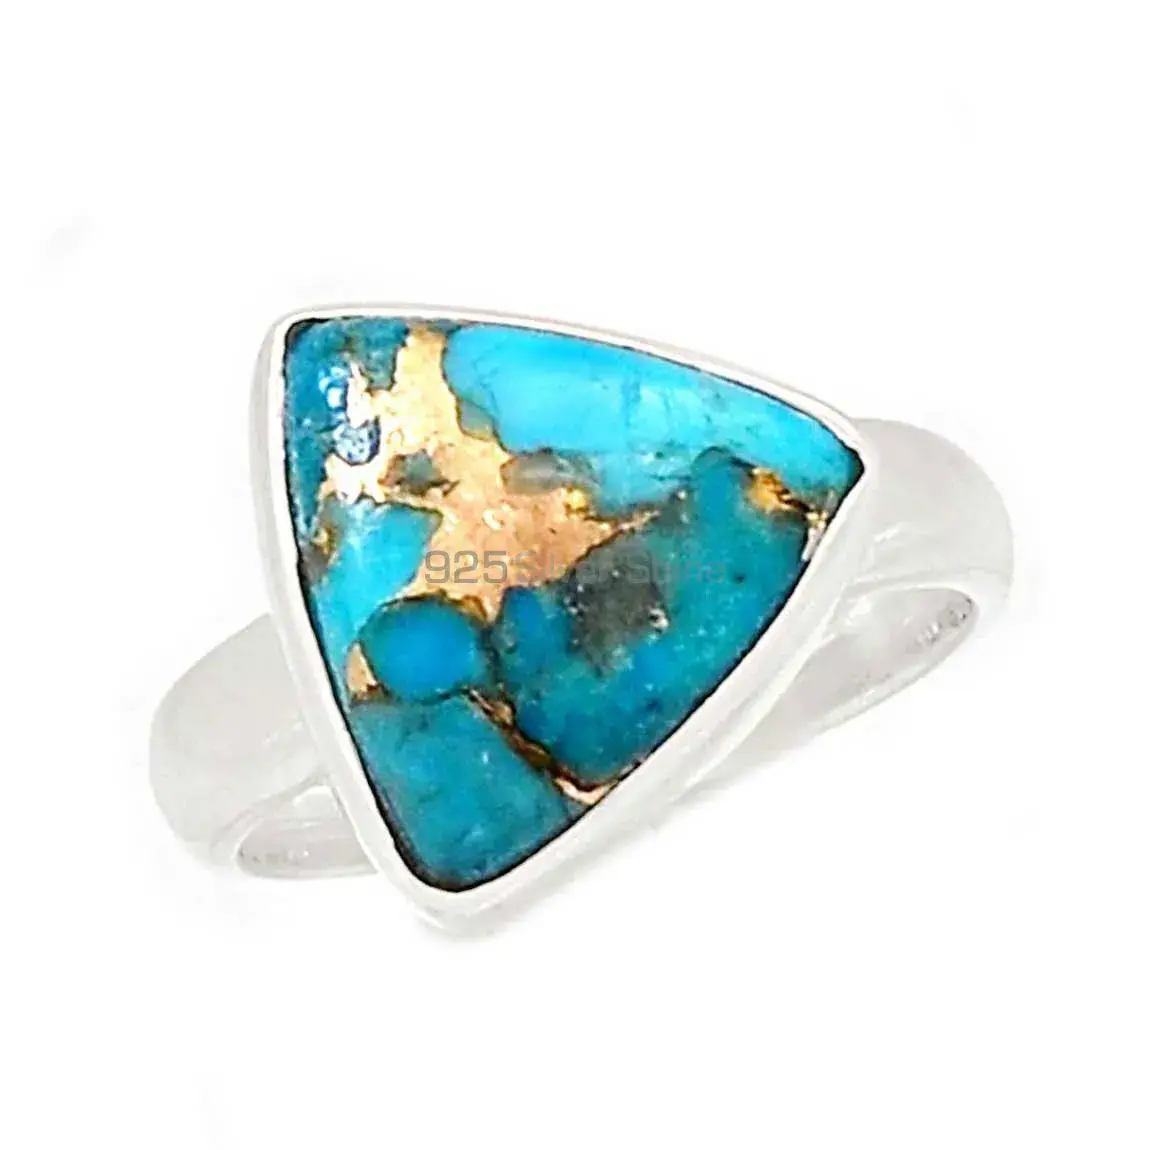 Copper Turquoise Gemstone Handmade Ring In Sterling Silver Jewelry 925SR2299